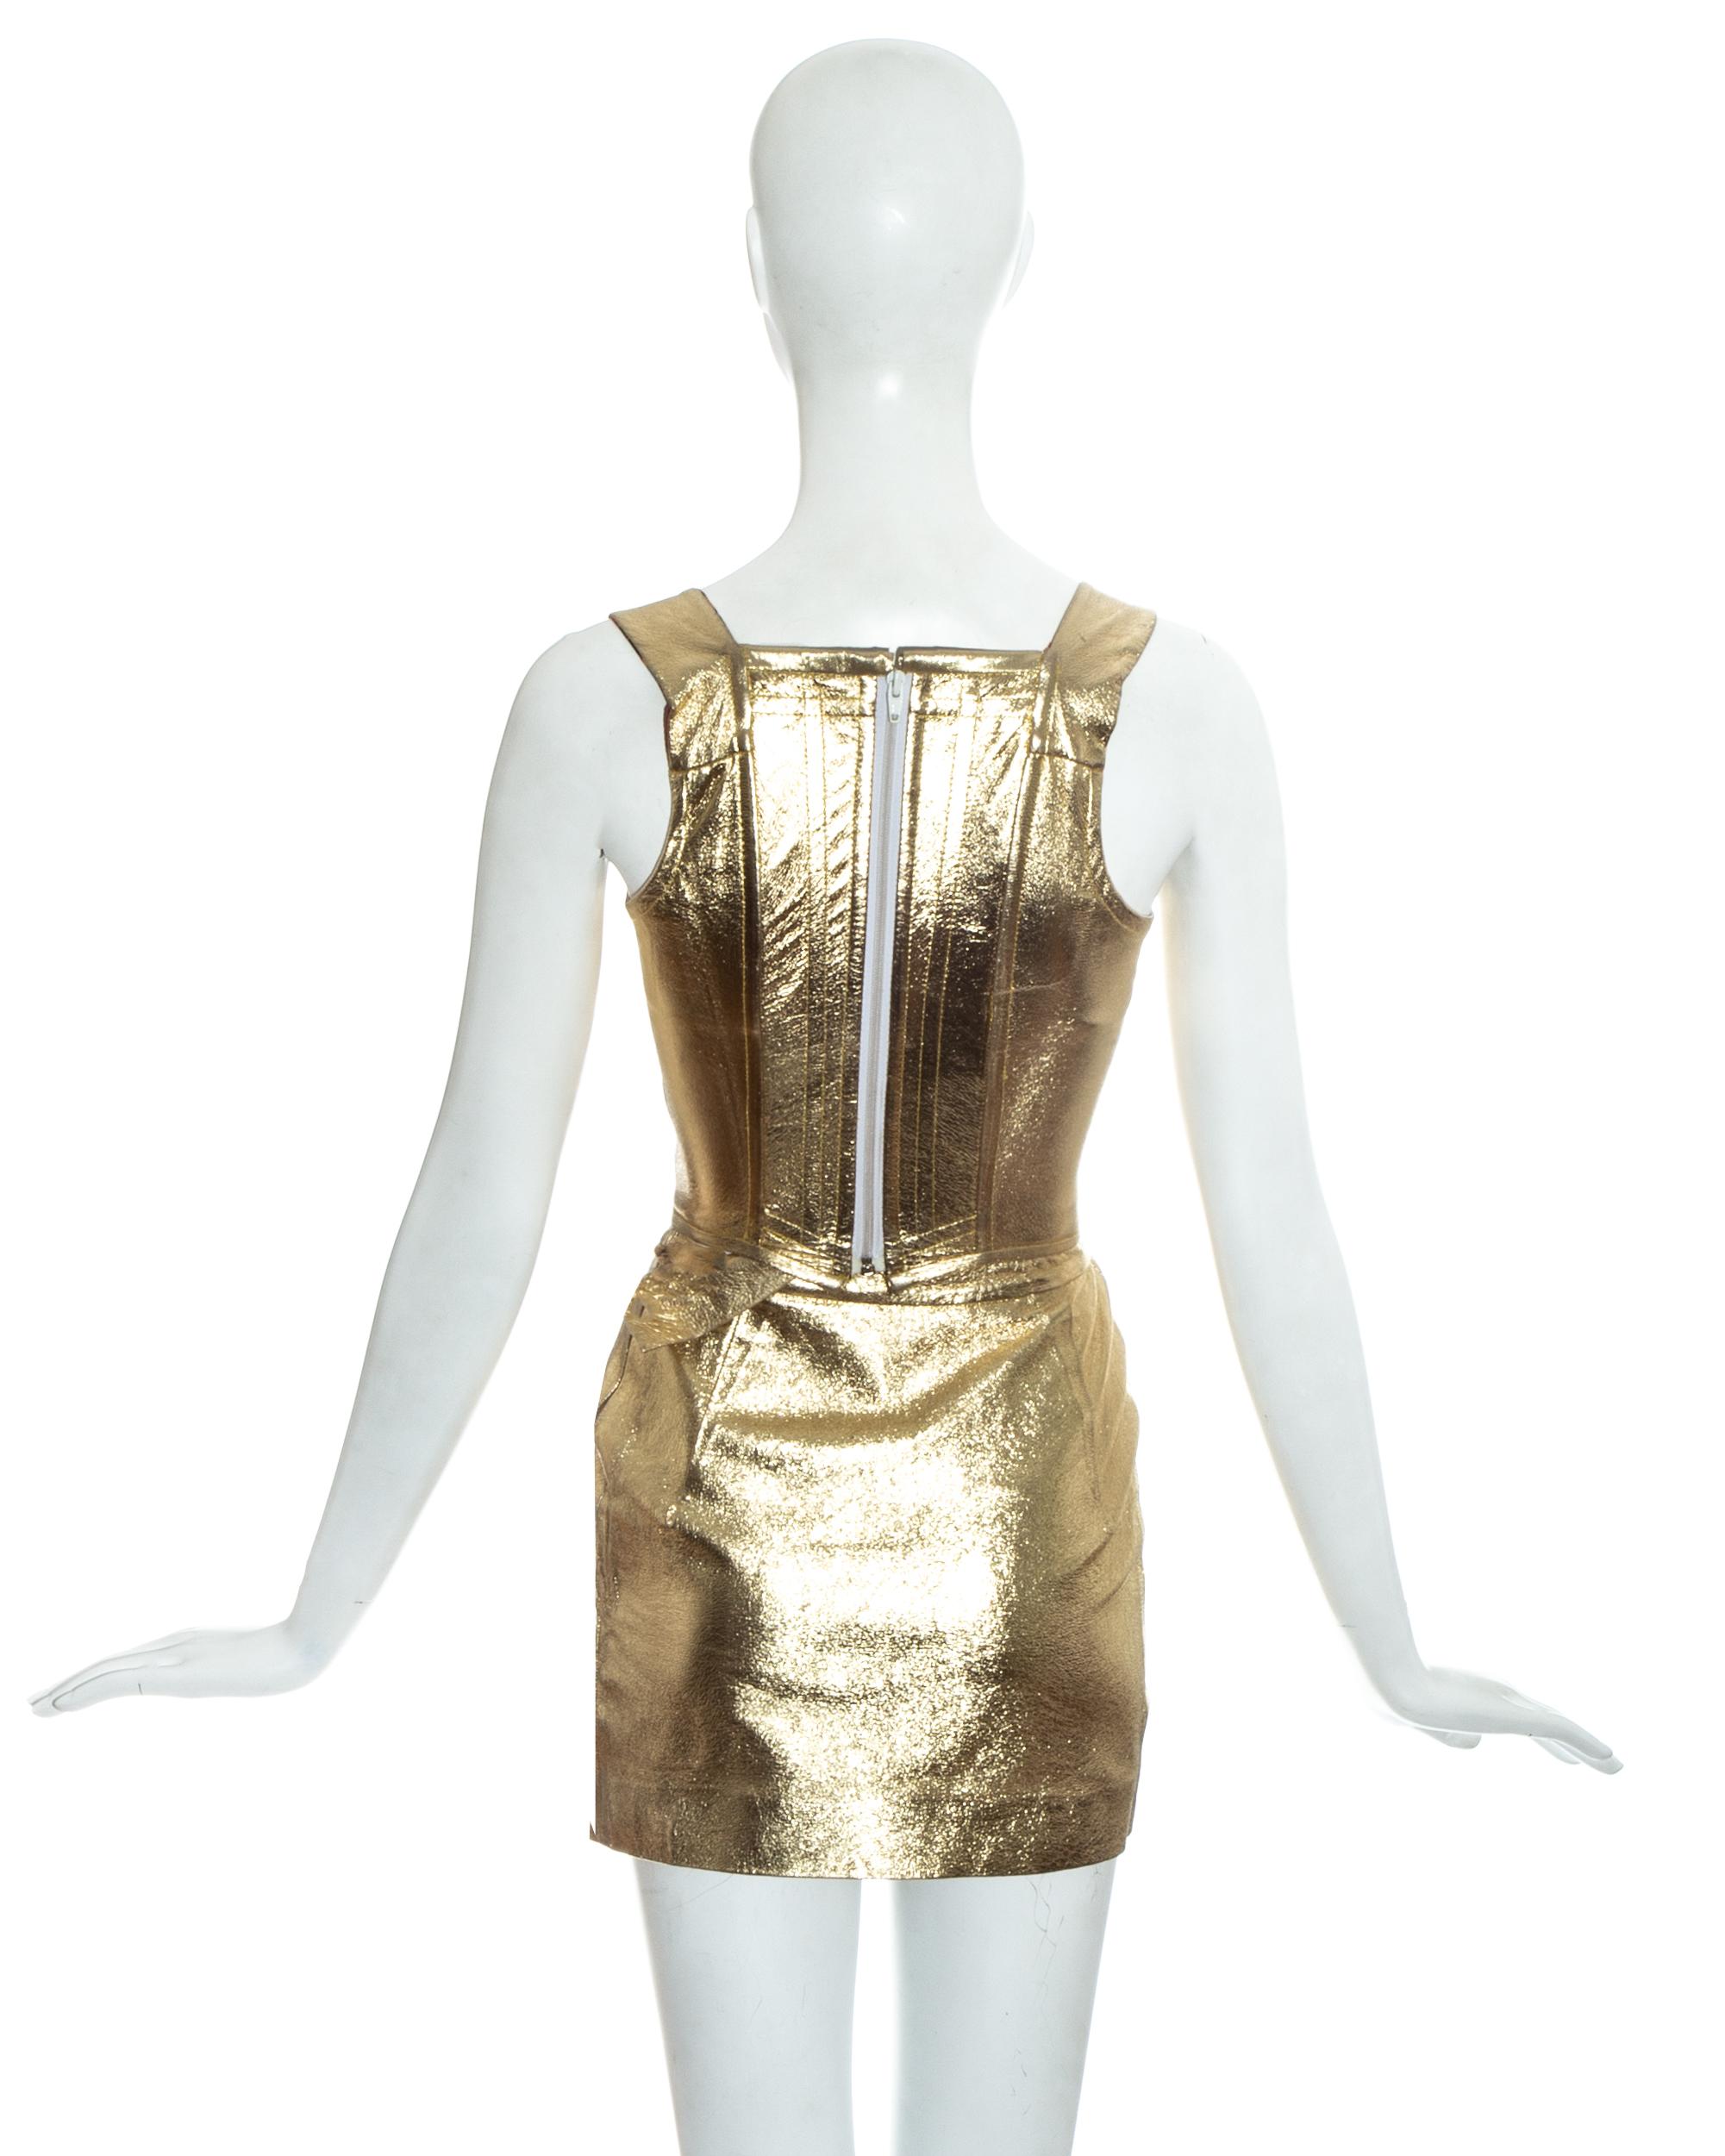 Vivienne Westwood gold leather corset and mini skirt, 'Time Machine' ss 1988 For Sale 1